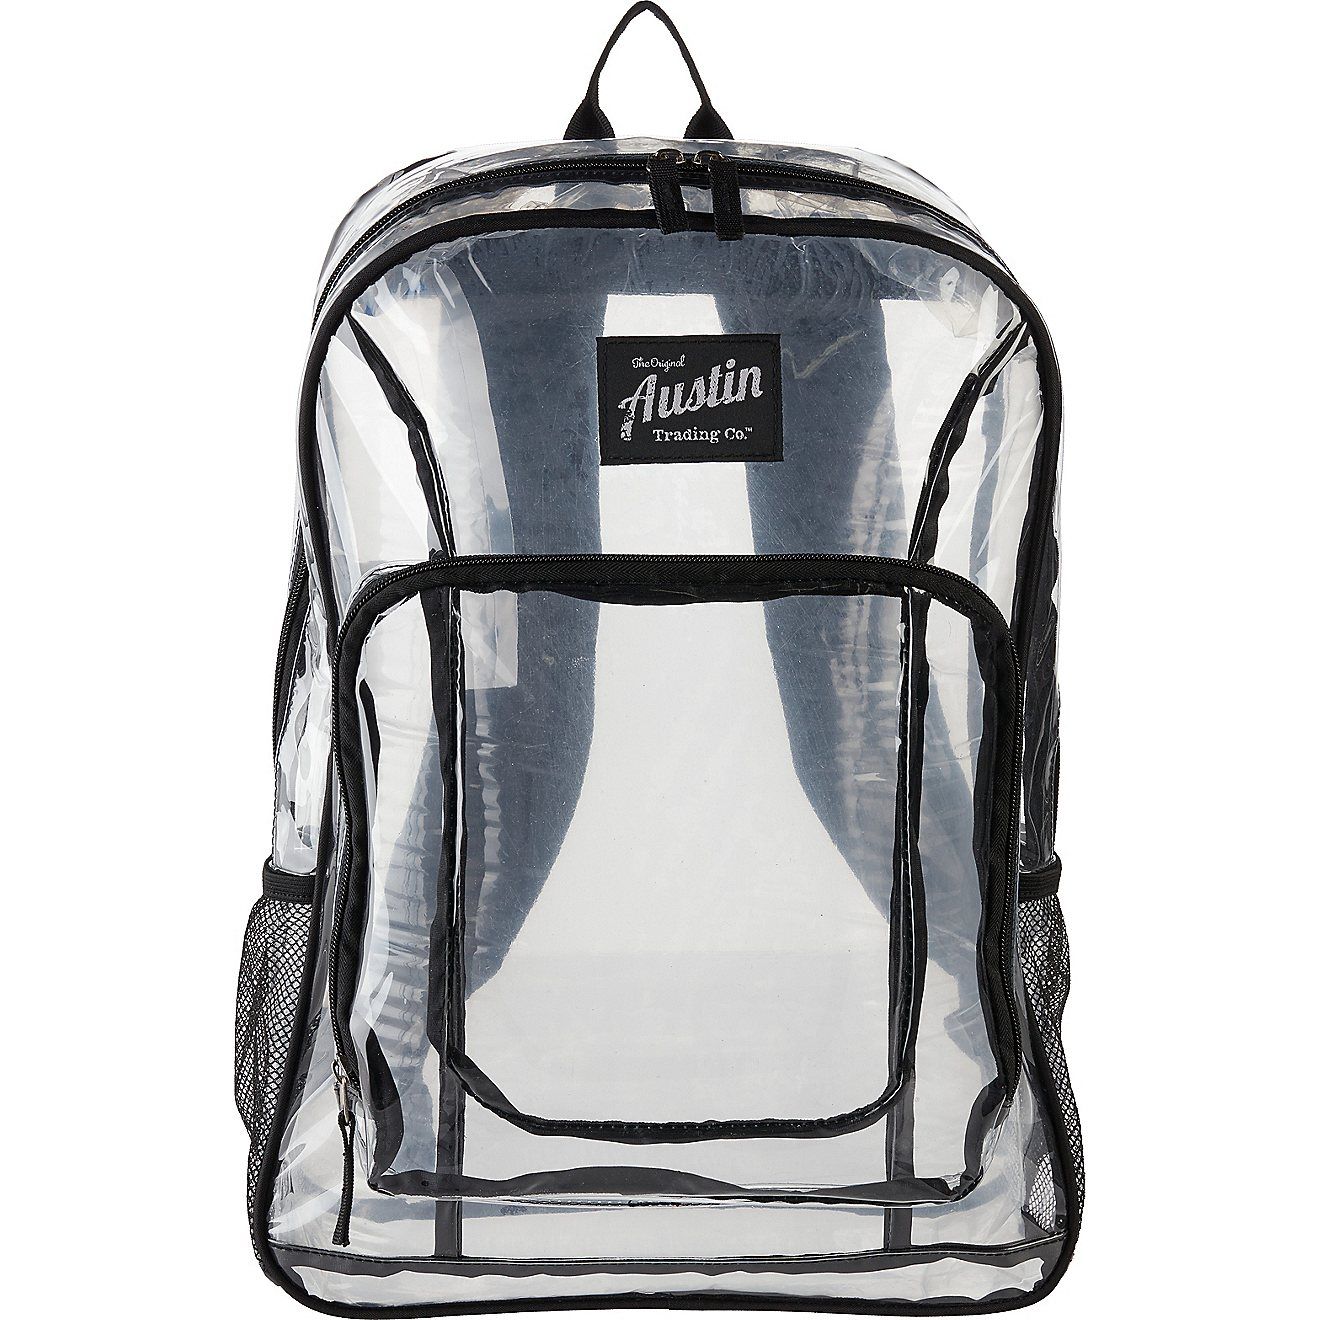 Austin Trading Co. Clear Backpack | Academy Sports + Outdoor Affiliate